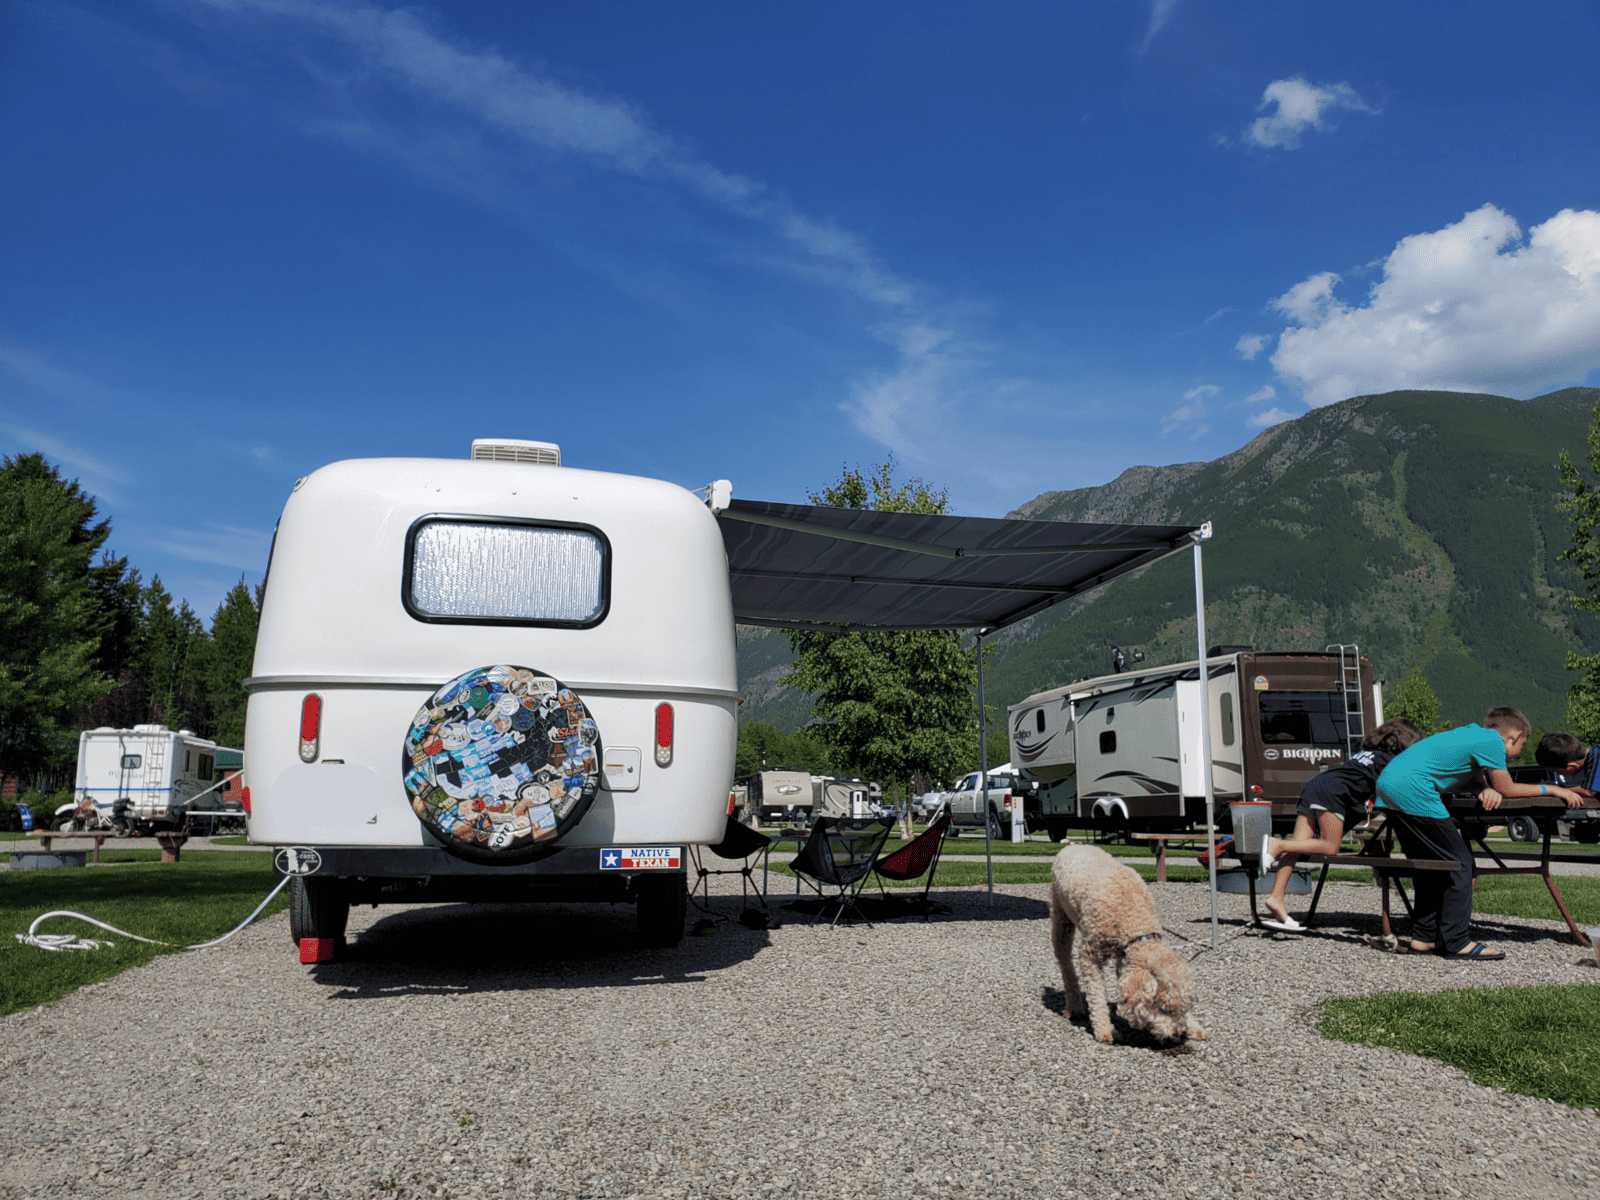 6 Warnings for RV Camping in The National Parks